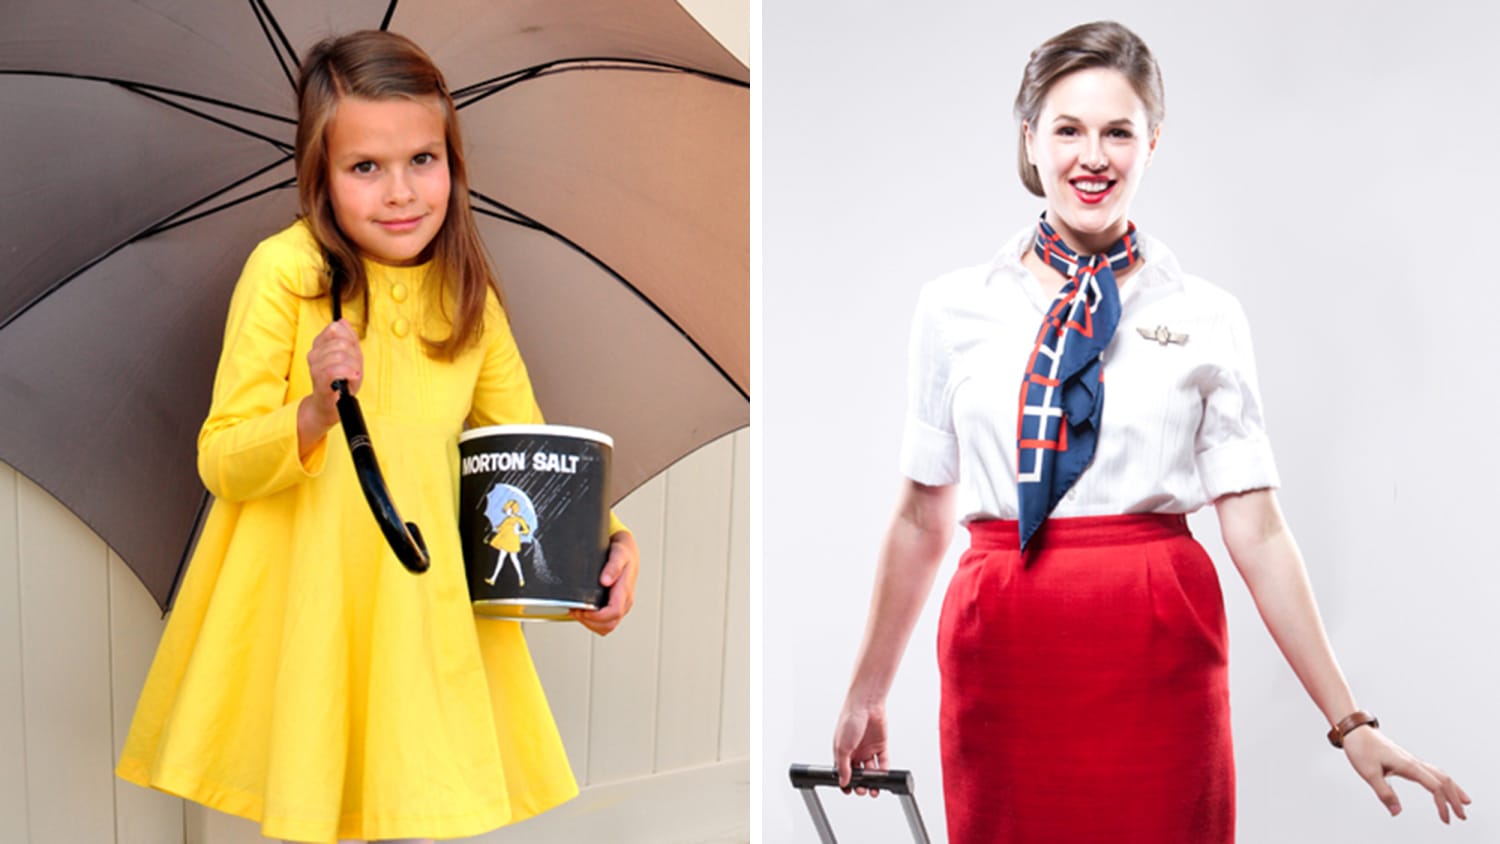 Easy costumes ideas to make at home.